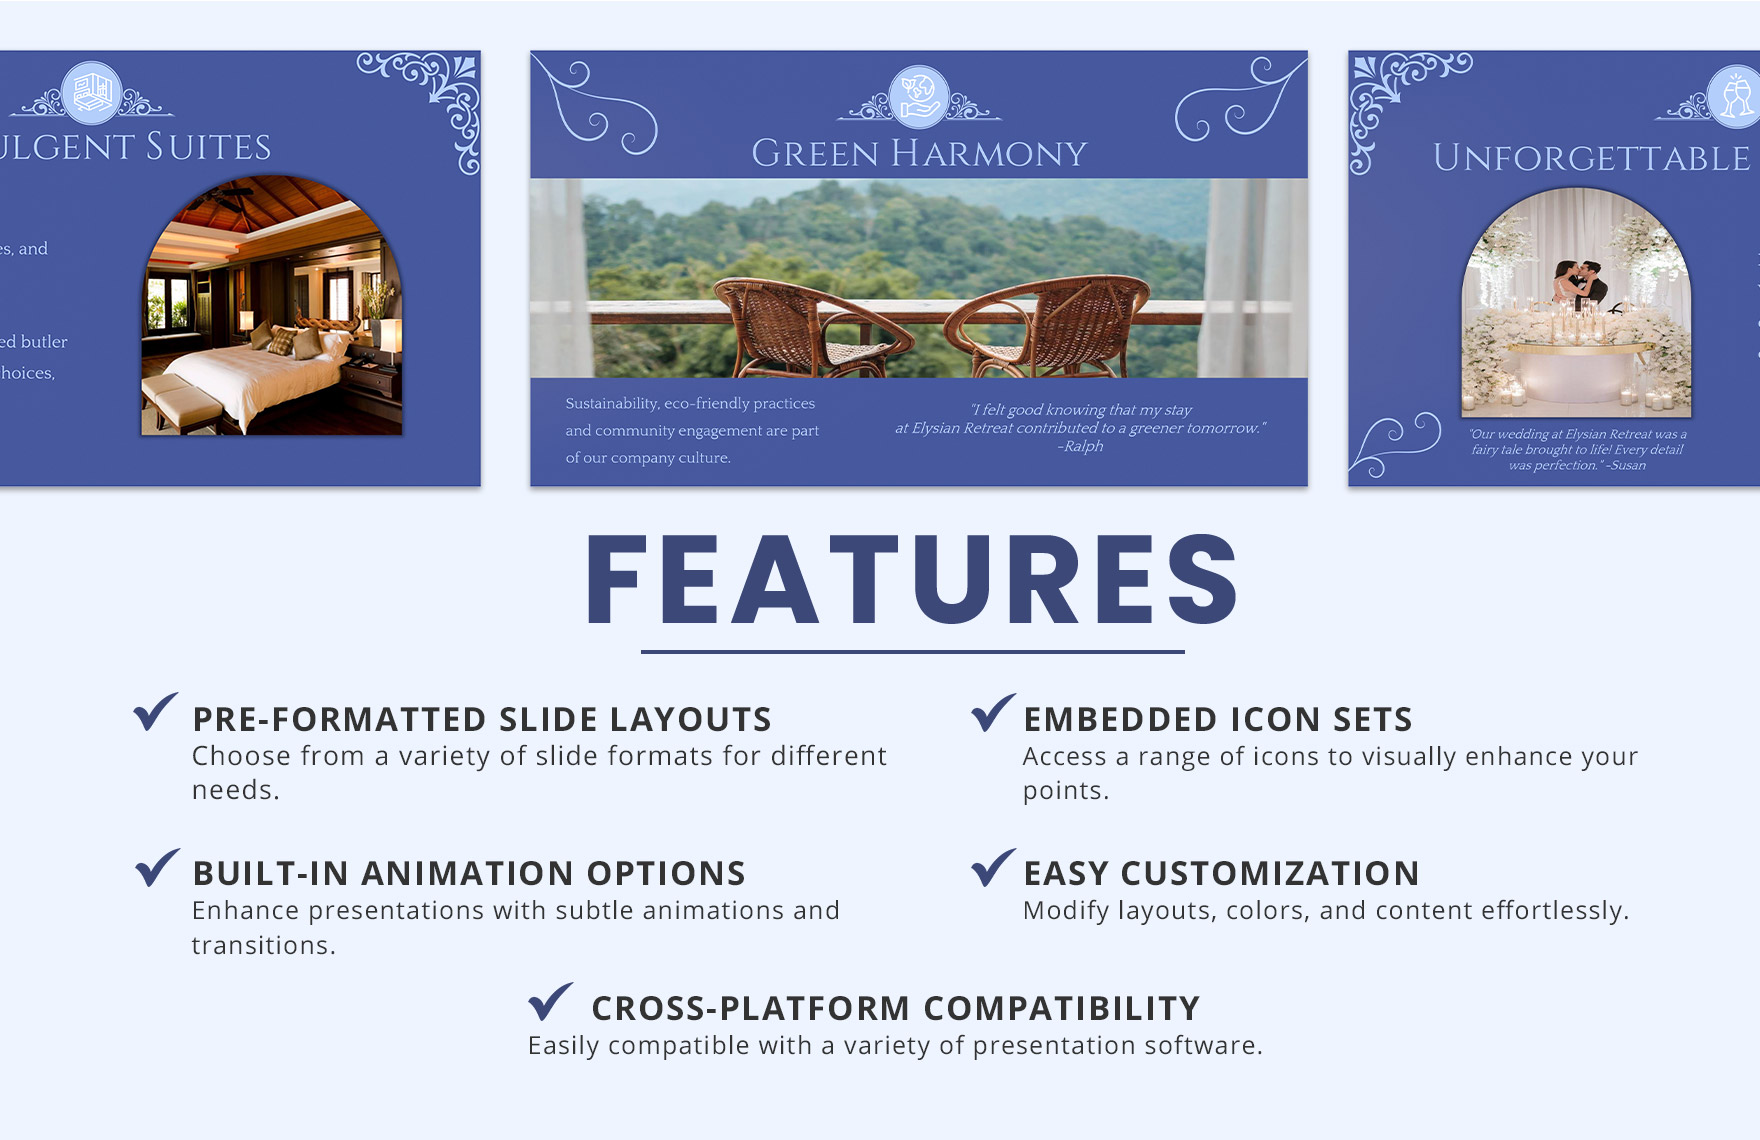 Guest Experience Hotel Template